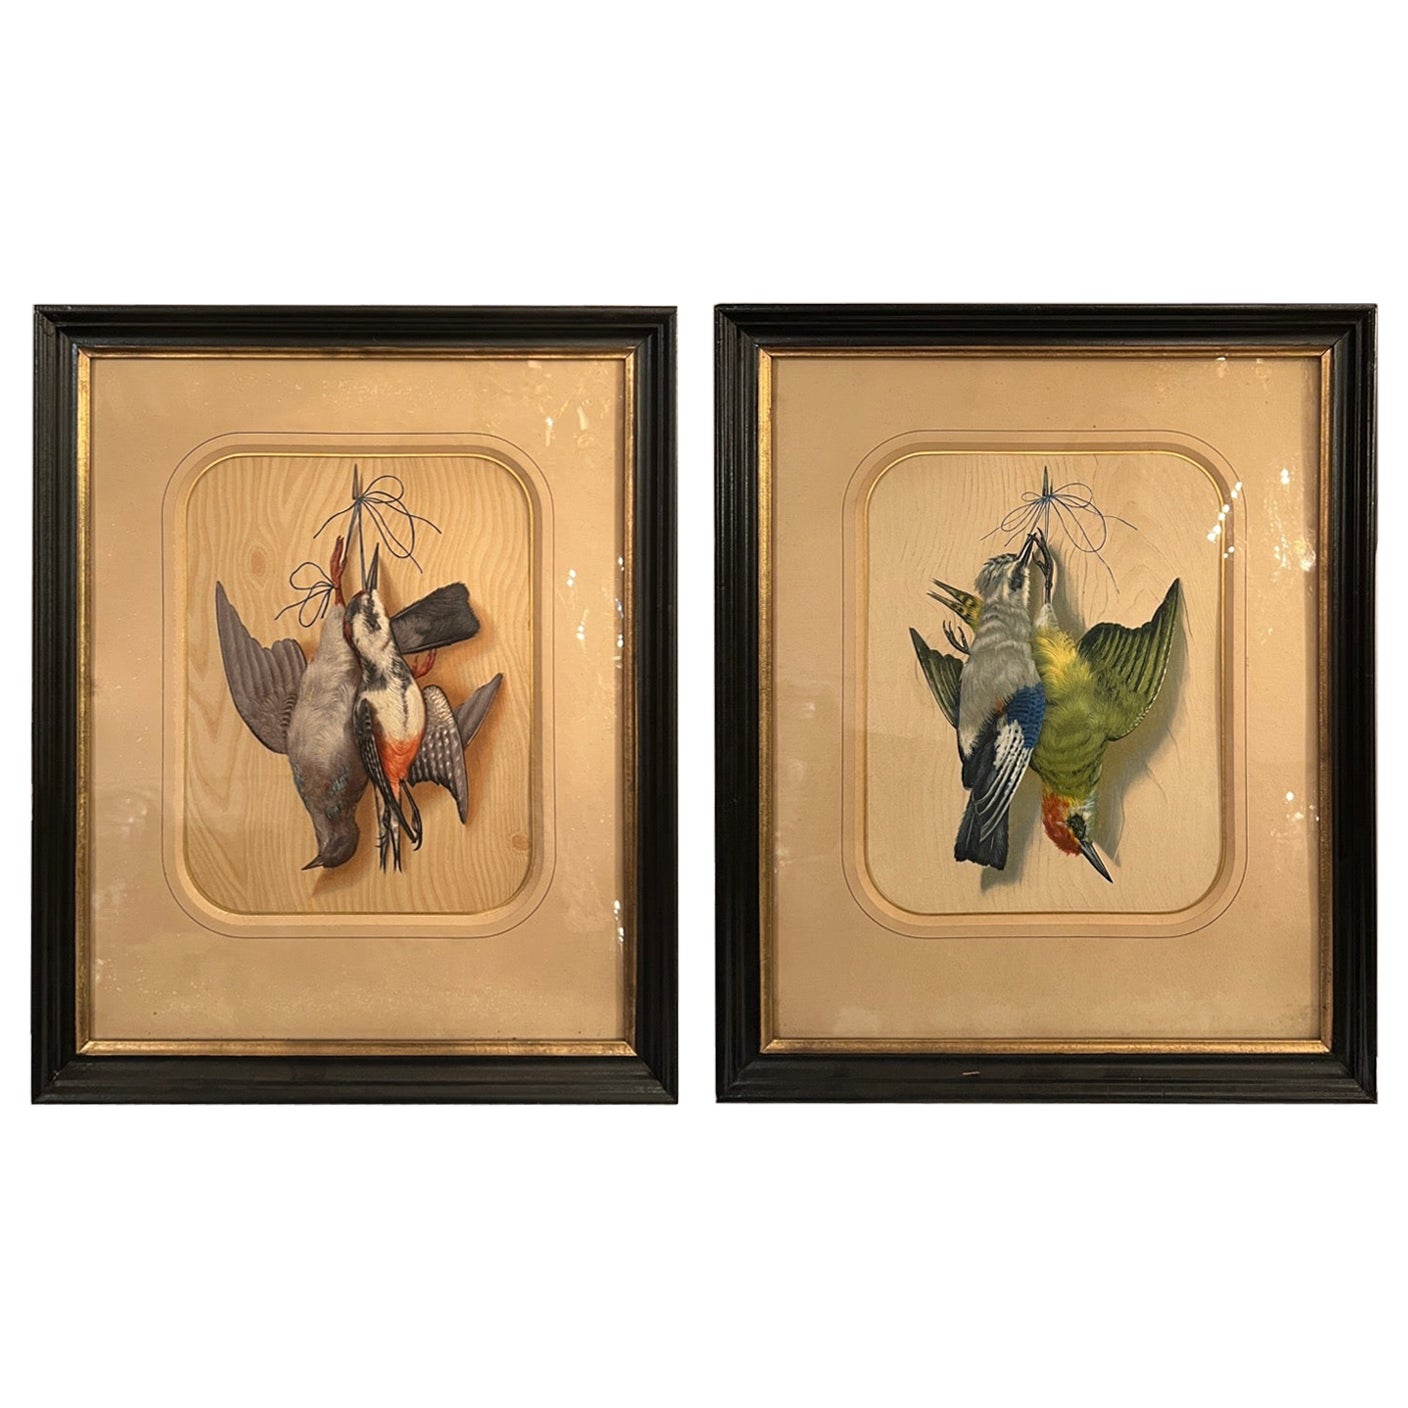 Pair Antique Framed "Nature Mortes" Paintings on Wood Panel, Circa 1870. For Sale